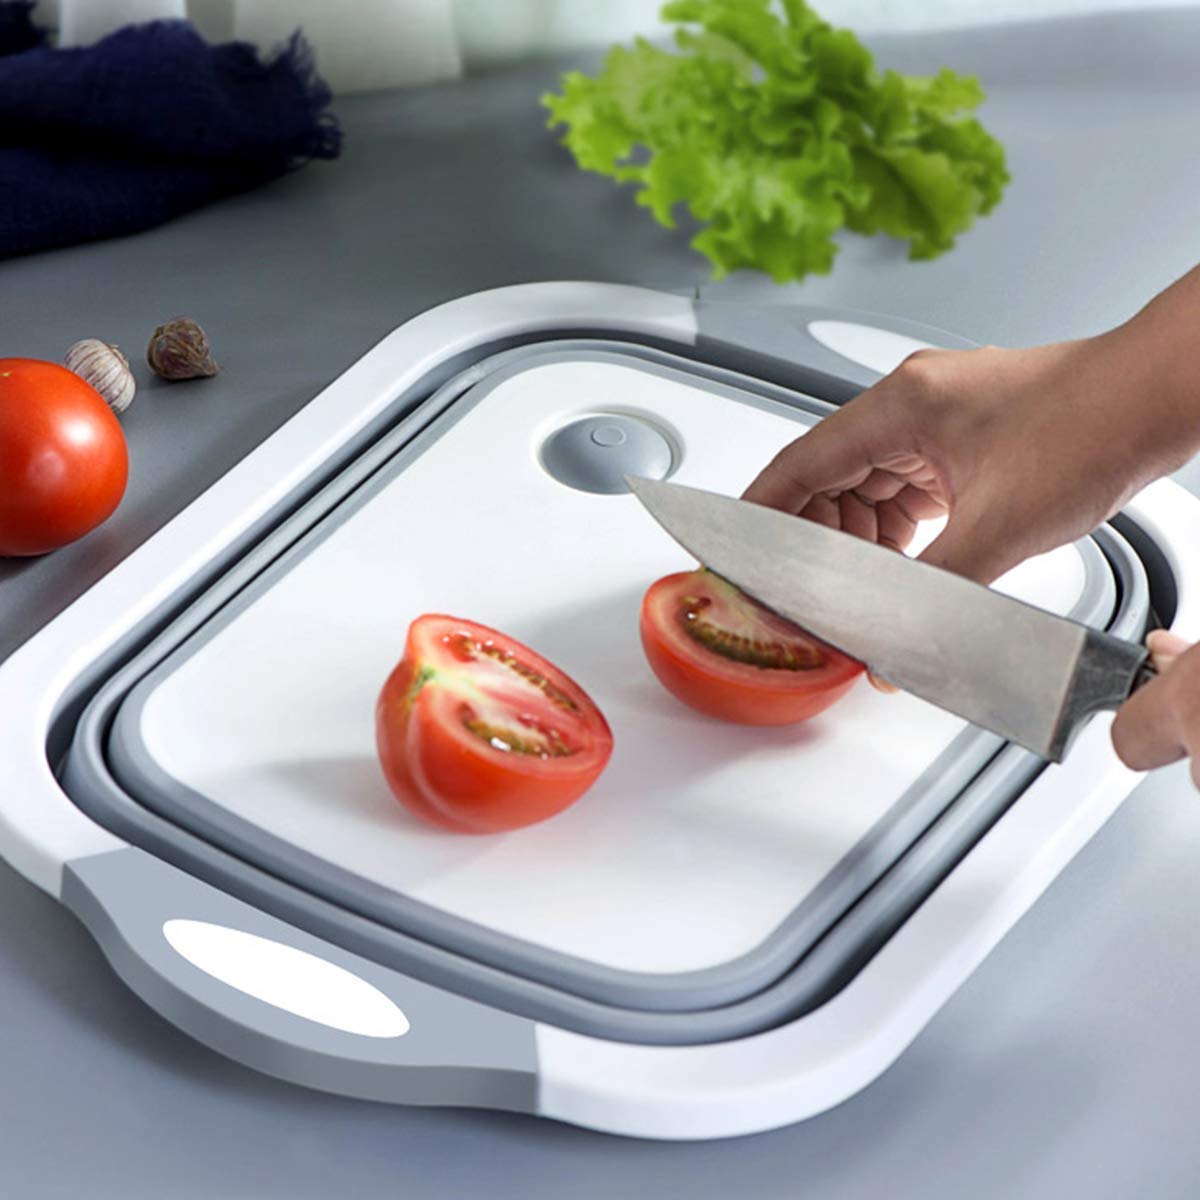 Collapsible Cutting Board with Dish Tub Basket